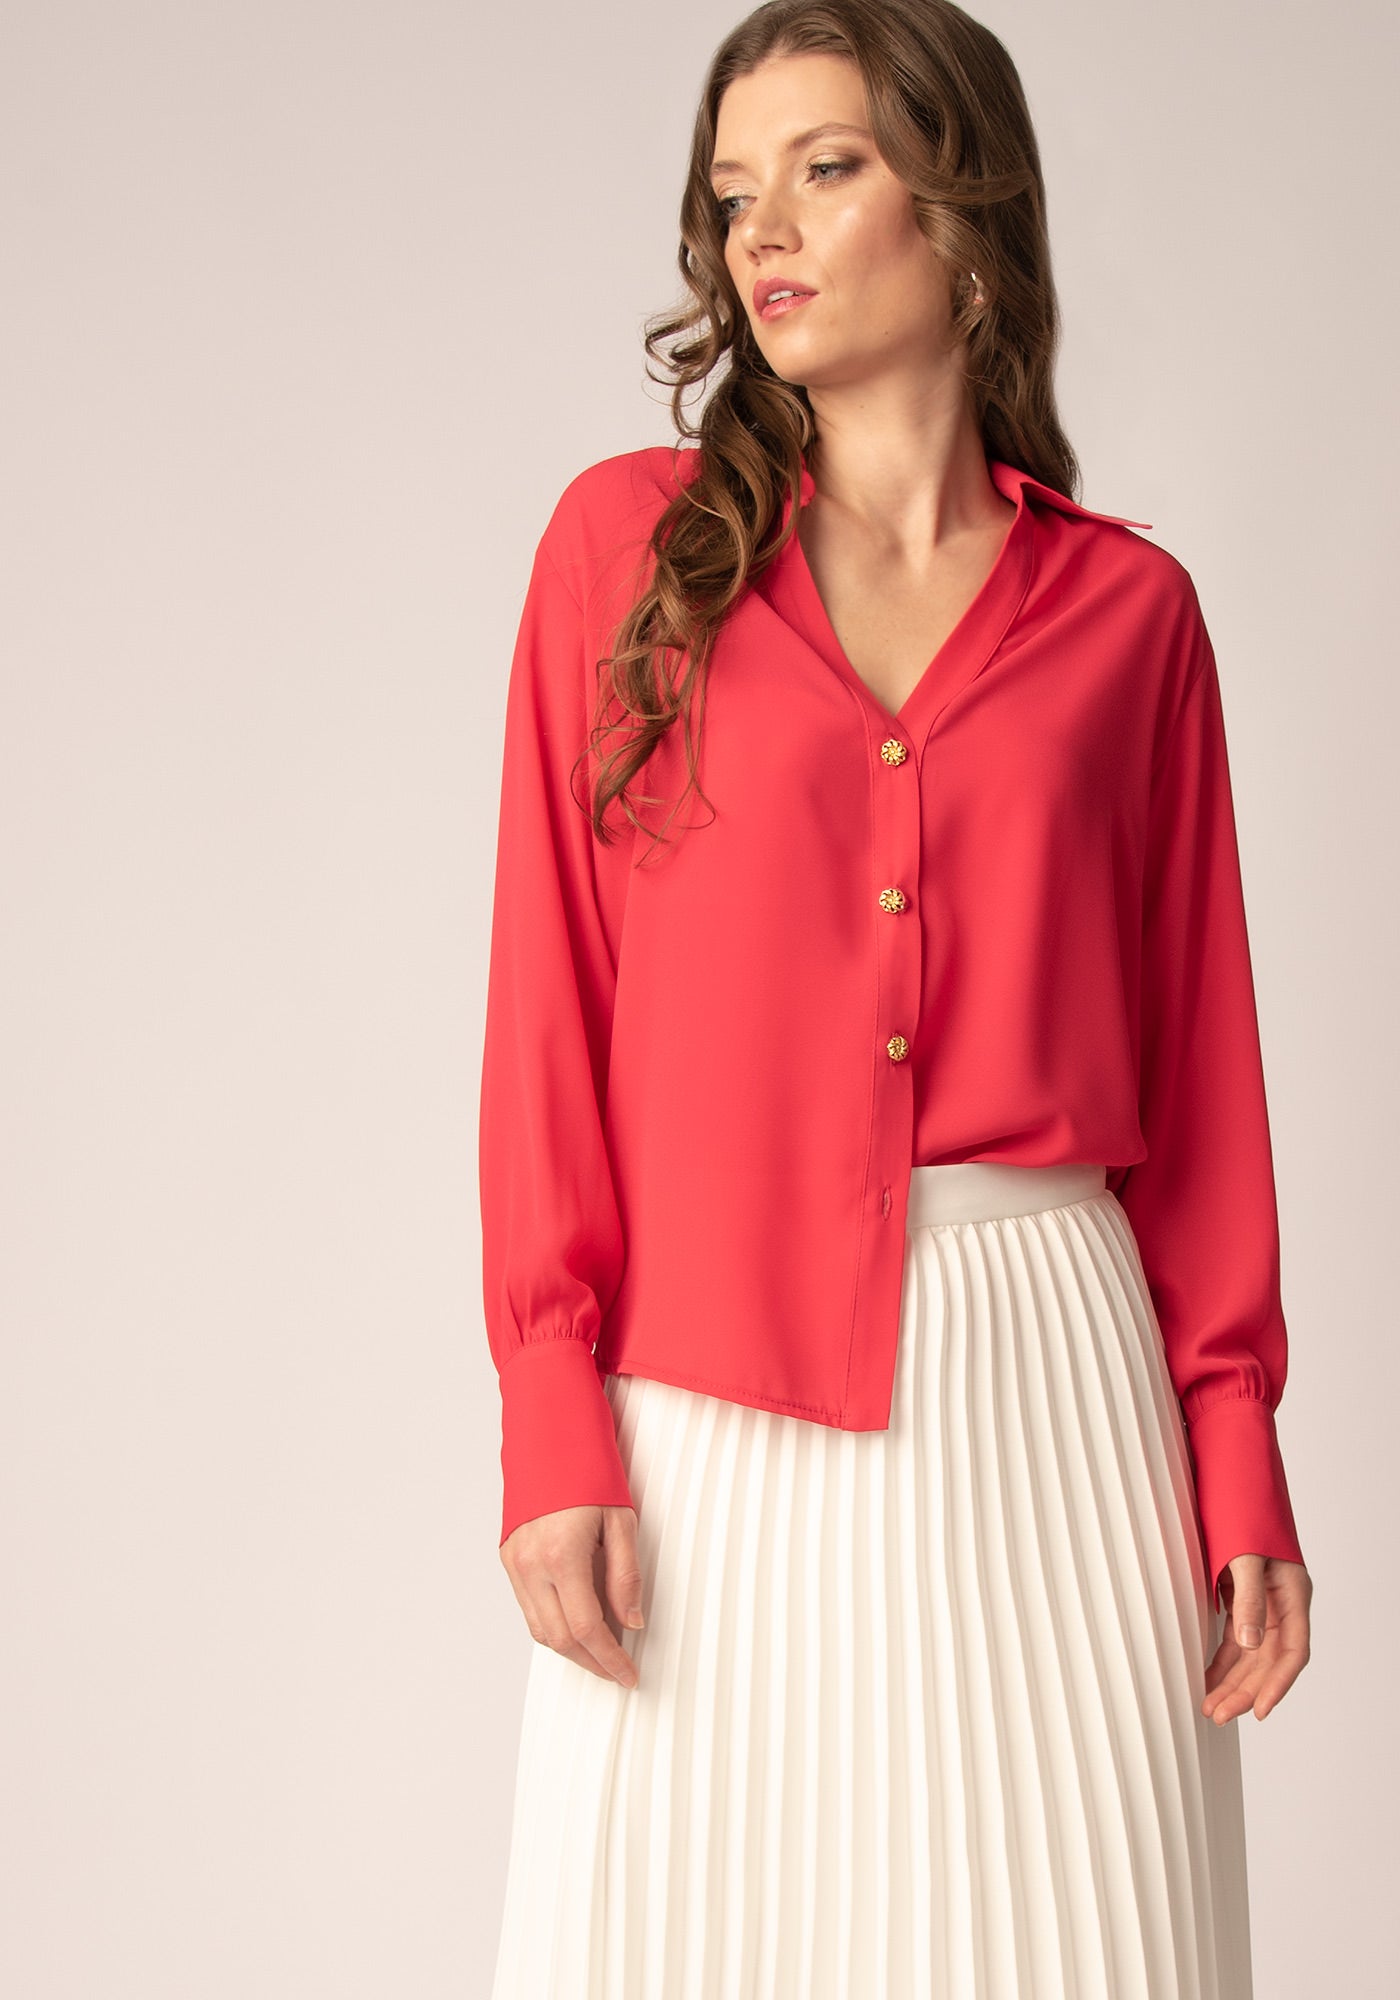 Women's Relaxed Shirt with Gold buttons in Magenta